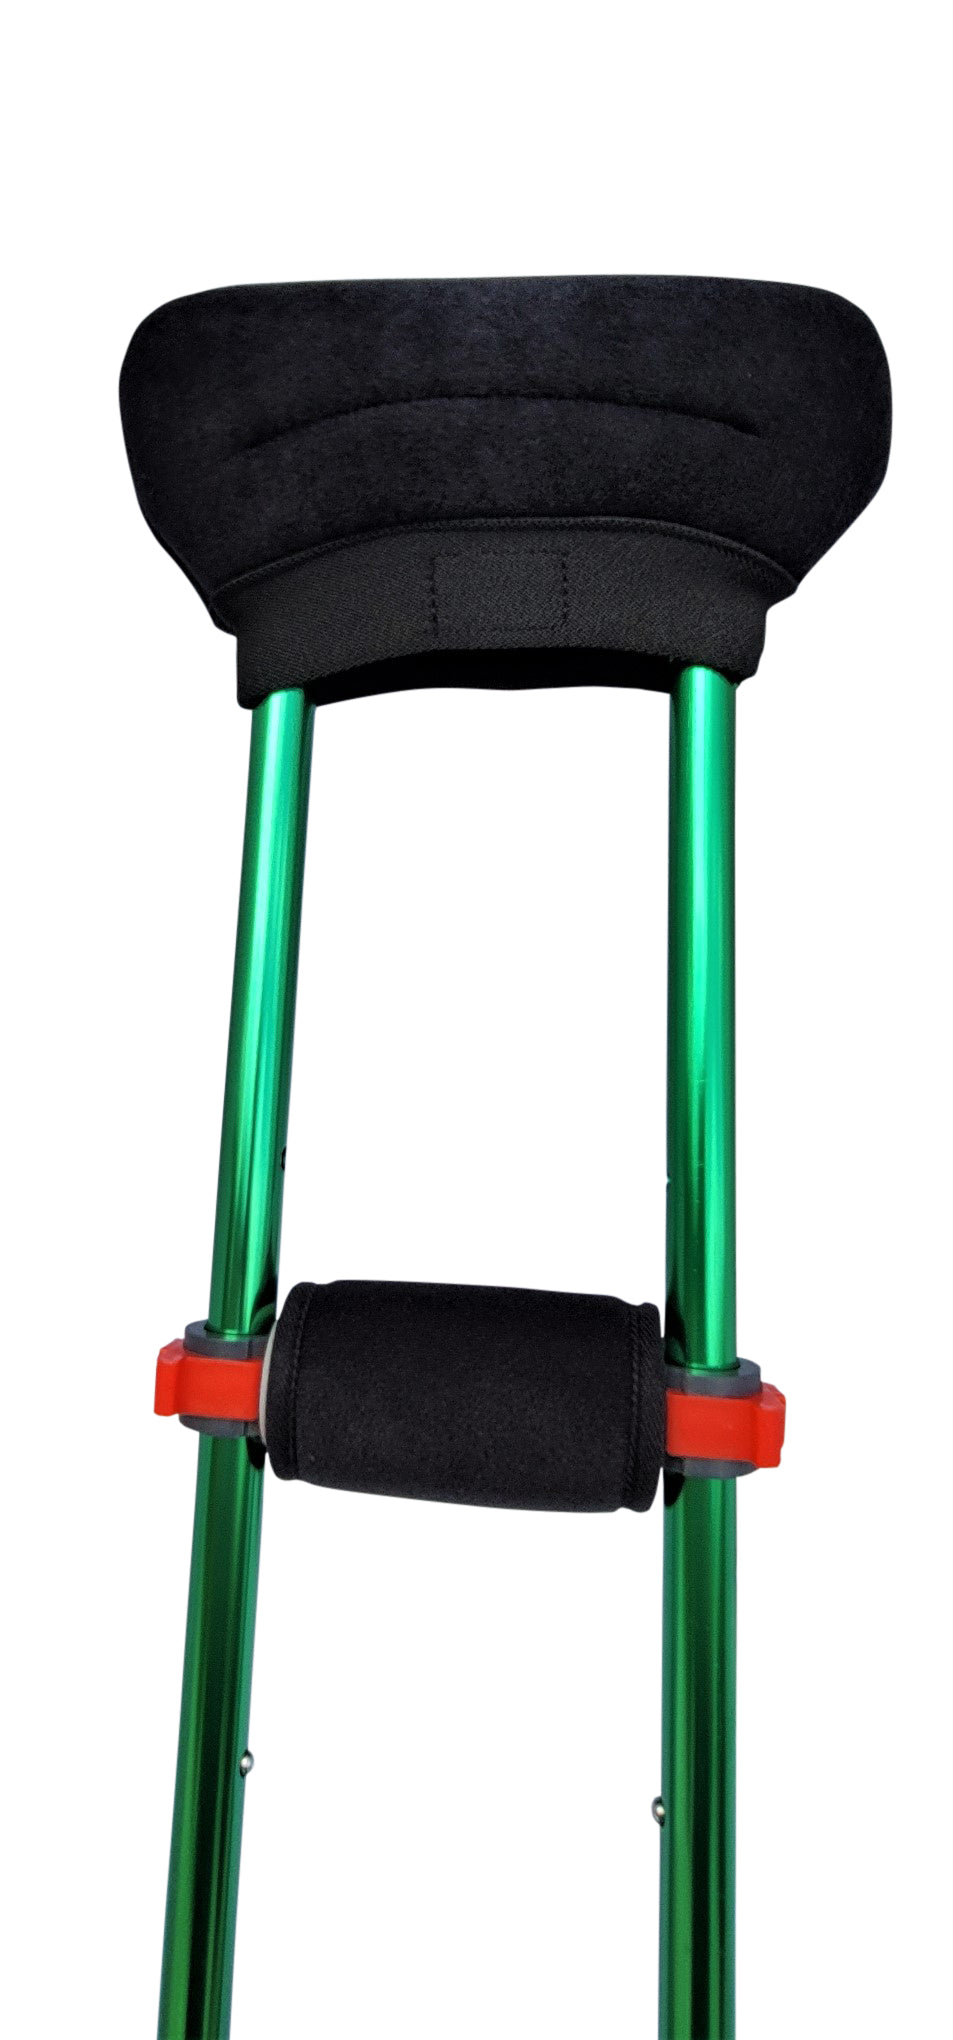 Add on Crutch comfort foam pads come as set for both crutches.